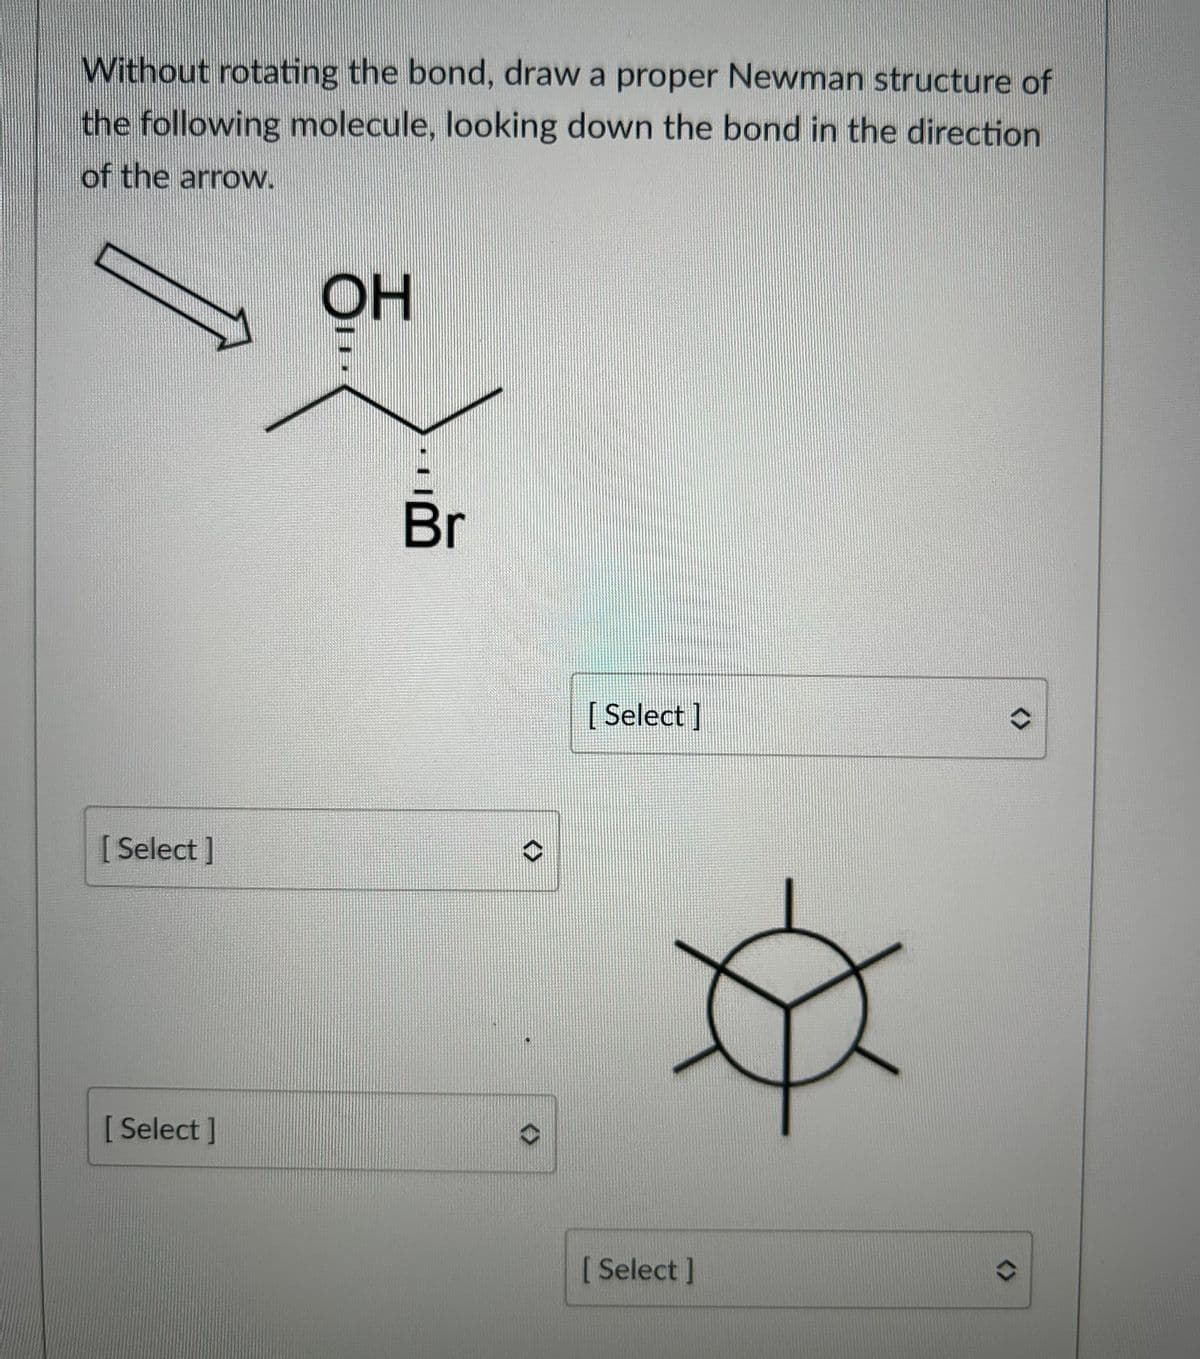 ### Analyzing and Drawing Newman Projections

#### Problem Statement
Without rotating the bond, draw a proper Newman structure of the following molecule, looking down the bond in the direction of the arrow:

![Molecular Diagram]()
- The molecule has an -OH (hydroxyl group) attached to the first carbon and a -Br (bromine atom) attached to the second carbon.

#### Diagram Explanation
Here is the molecular structure with an arrow indicating the bond to be analyzed:
- The hydroxyl group (-OH) is on the carbon that the arrow points FROM.
- The bromine atom (-Br) is on the carbon that the arrow points TOWARD.

#### Instructions
Select the appropriate Newman projections from the drop-down menus for both the front and rear carbon atoms from the viewpoint indicated. 

#### Newman Projection Diagram
Below is a blank Newman projection circle where you will place the substituents in the correct positions:

![Blank Newman Projection Circle]()

### Drop-Down Options
For various positions on the Newman projection, attribute the correct groups without rotating the bond:

1. Select the front carbon substituents:
   - [ Select ]

2. Select the rear carbon substituents:
   - [ Select ]

#### Final Tips
To accurately determine the correct Newman projection structure:
- Visualize the molecule's substituents from the arrow's perspective.
- Ensure that you account for the three-dimensional spatial arrangements, keeping in mind the consistency of your view with the bond direction.

Provide correct placement for substituents such as -OH, -Br, and any remaining hydrogen atoms. This practice is fundamental in understanding steric interactions and conformational analysis in organic chemistry.